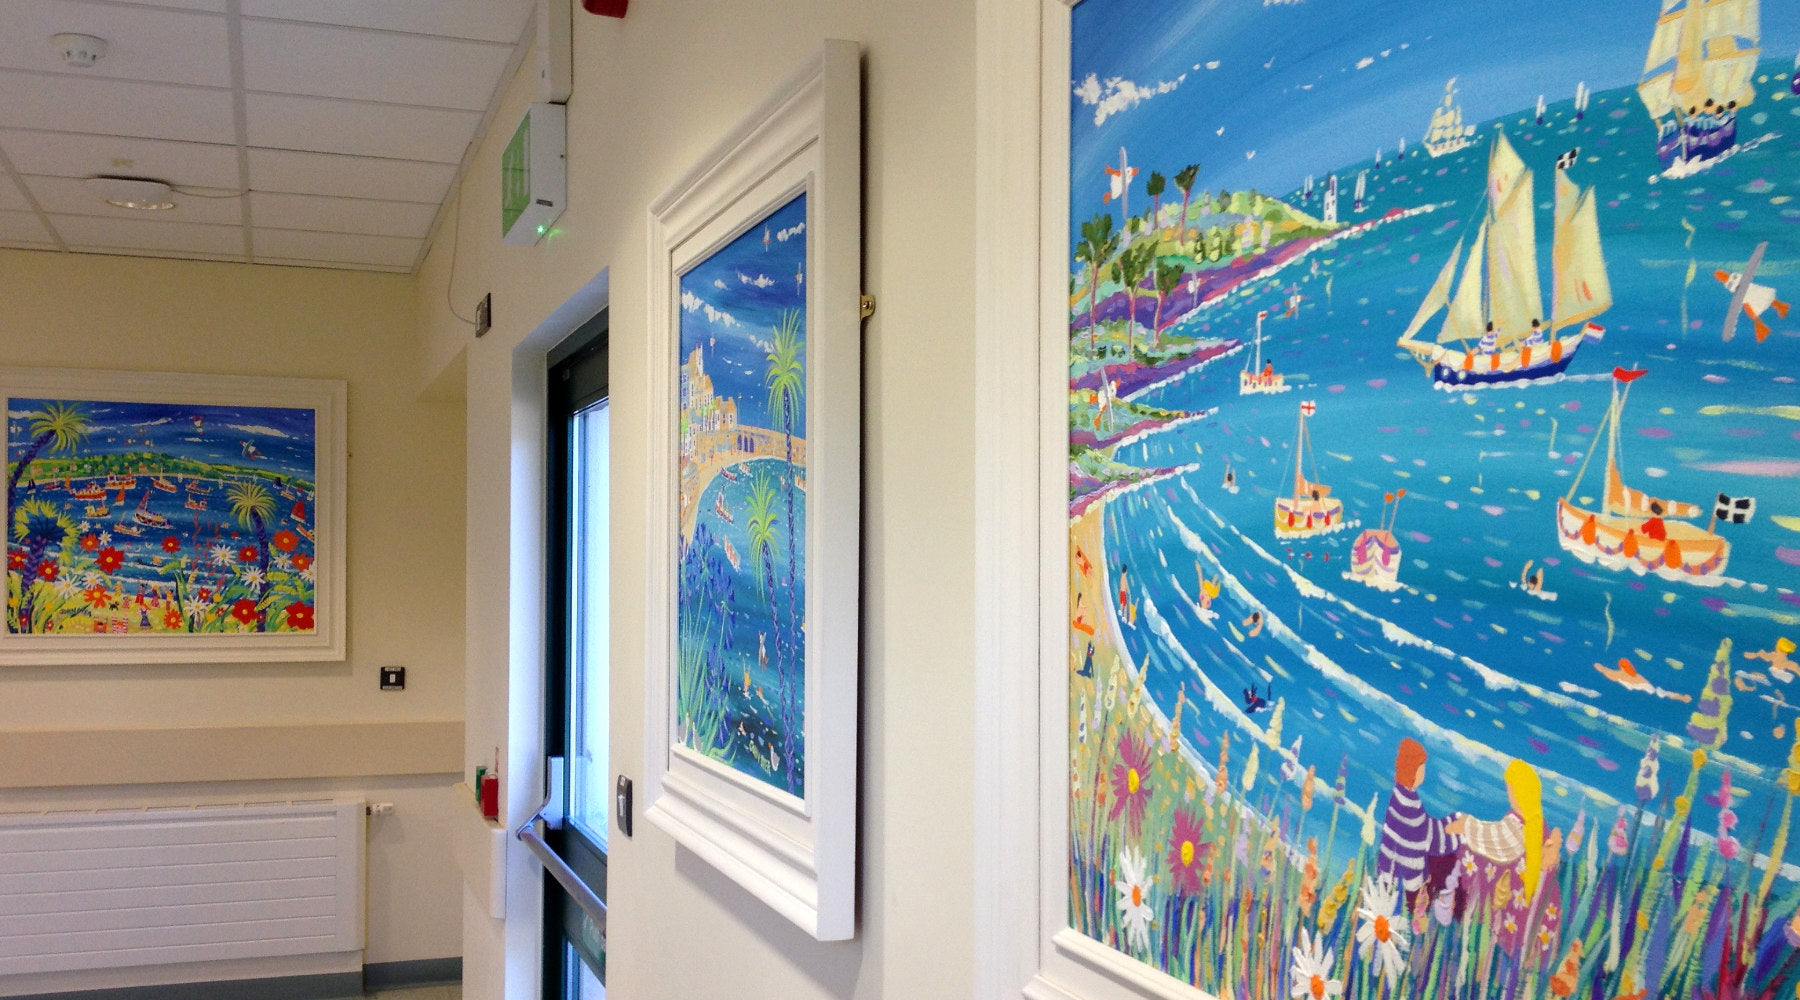 John Dyer paintings hanging in the oncology unit at the Royal Cornwall Hospital in Truro, Cornwall